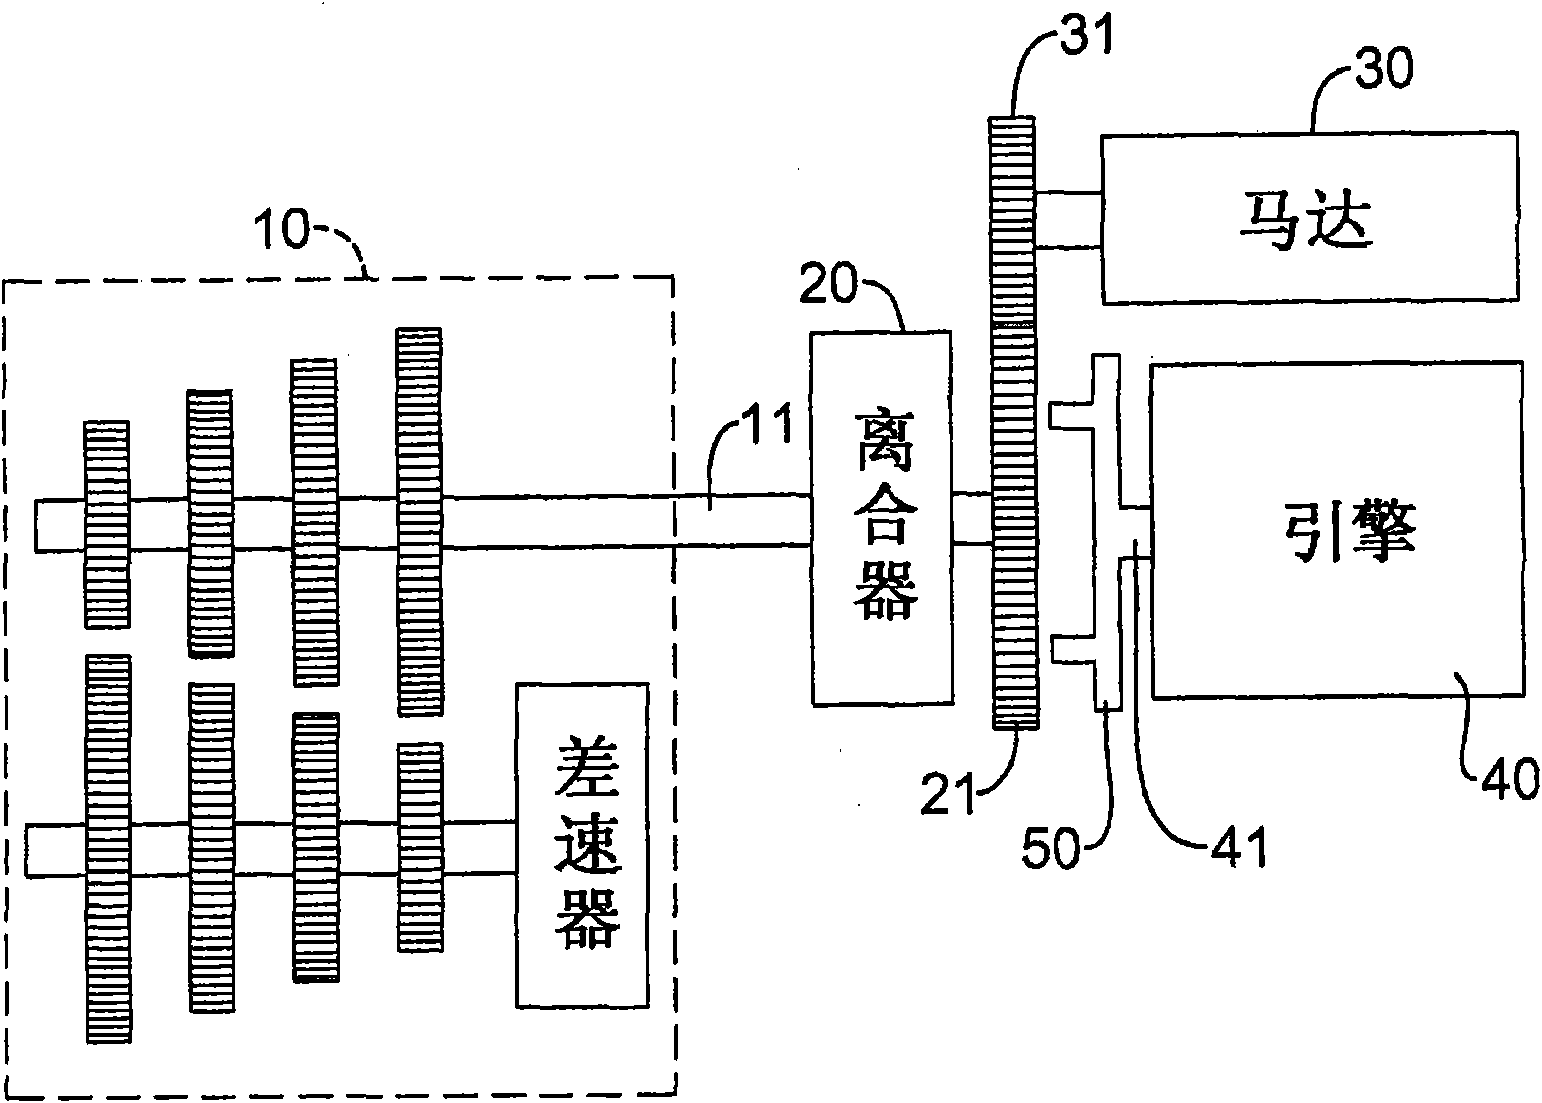 Hybrid power system for automobile